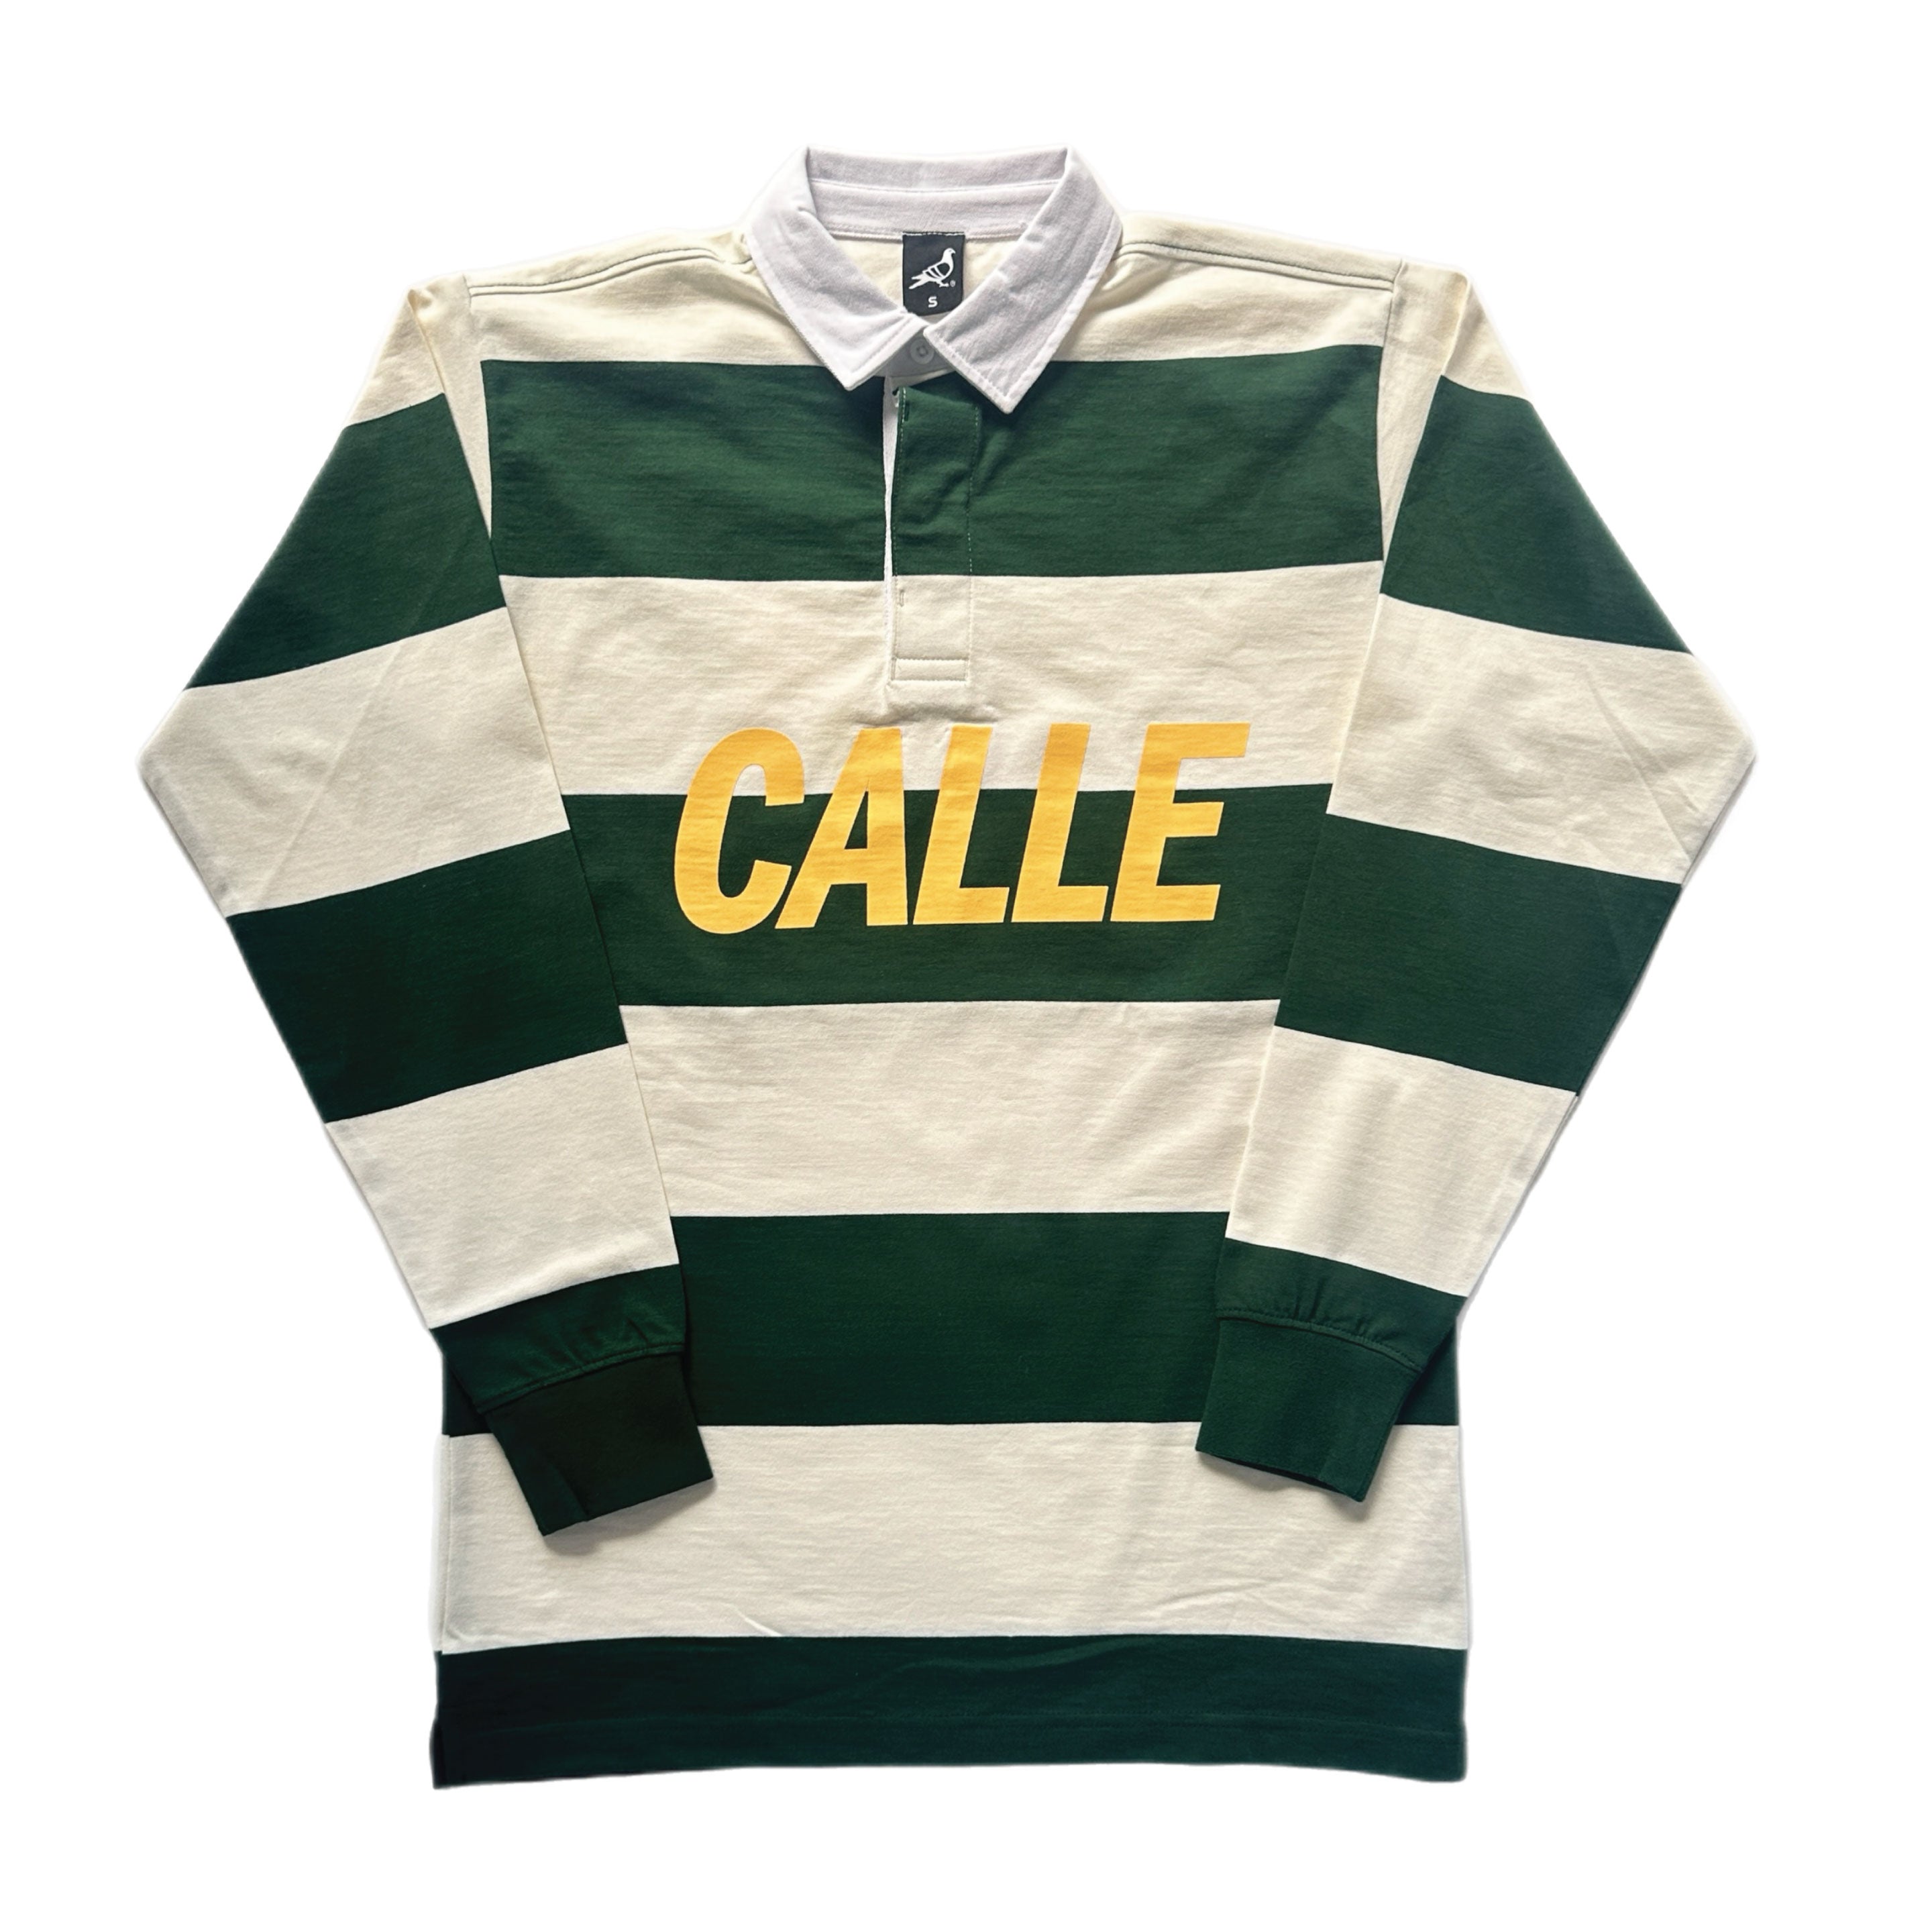 Calle's Retro Heritage Rugby